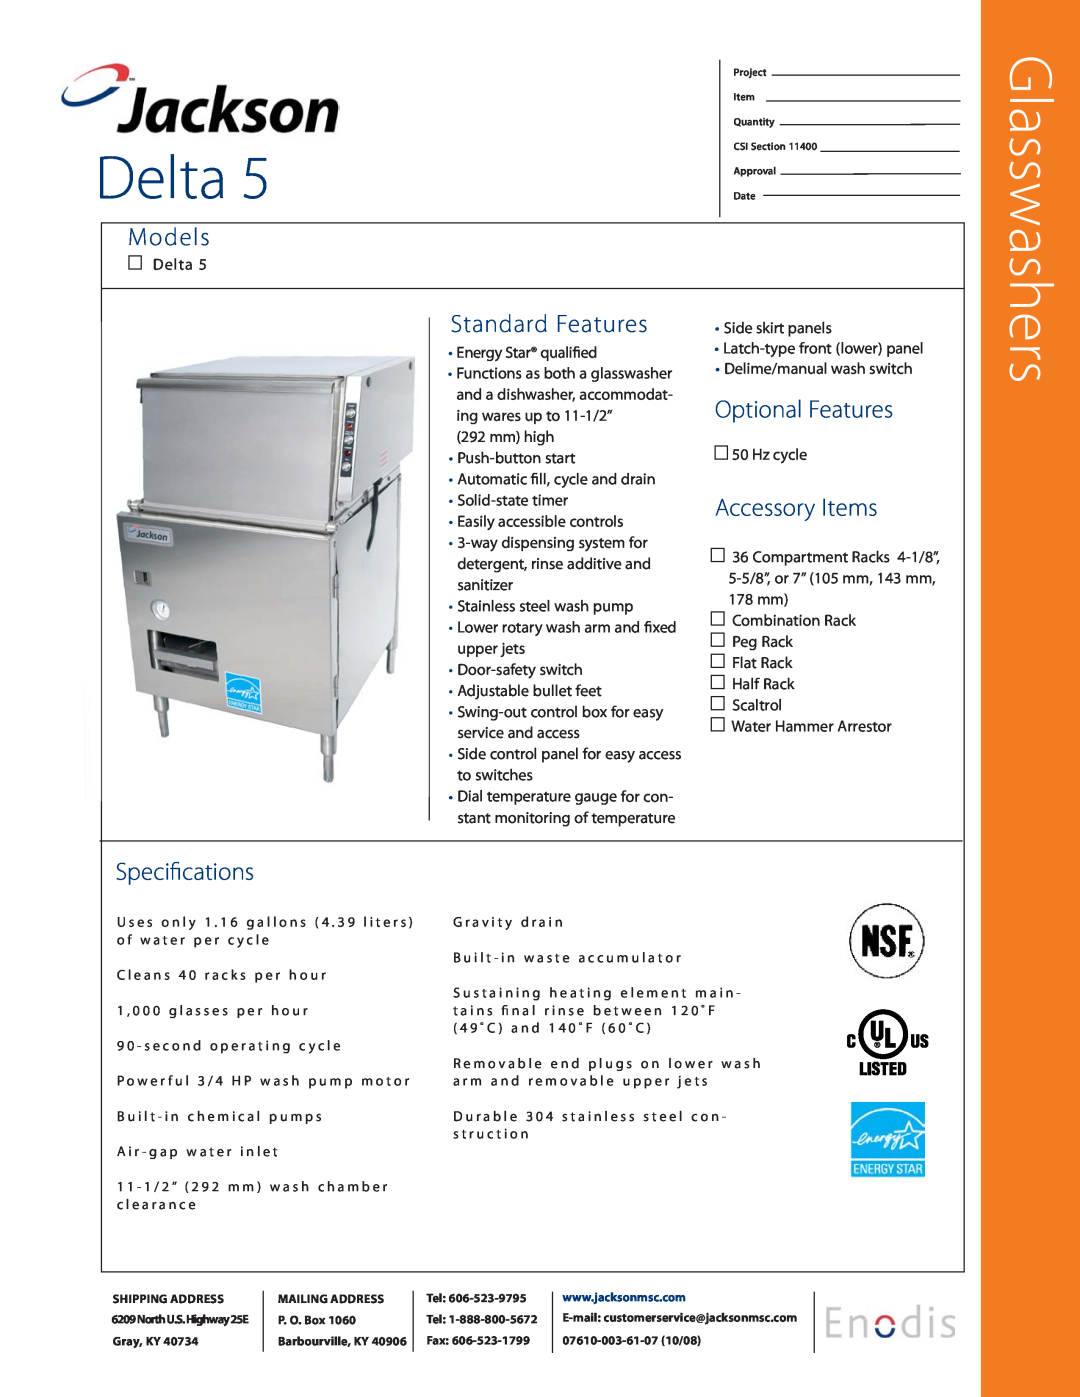 Jackson Delta 5 specifications a aG rsssw, Models, Standard Features, Optional Features, Accessory Items, Speciﬁcations 